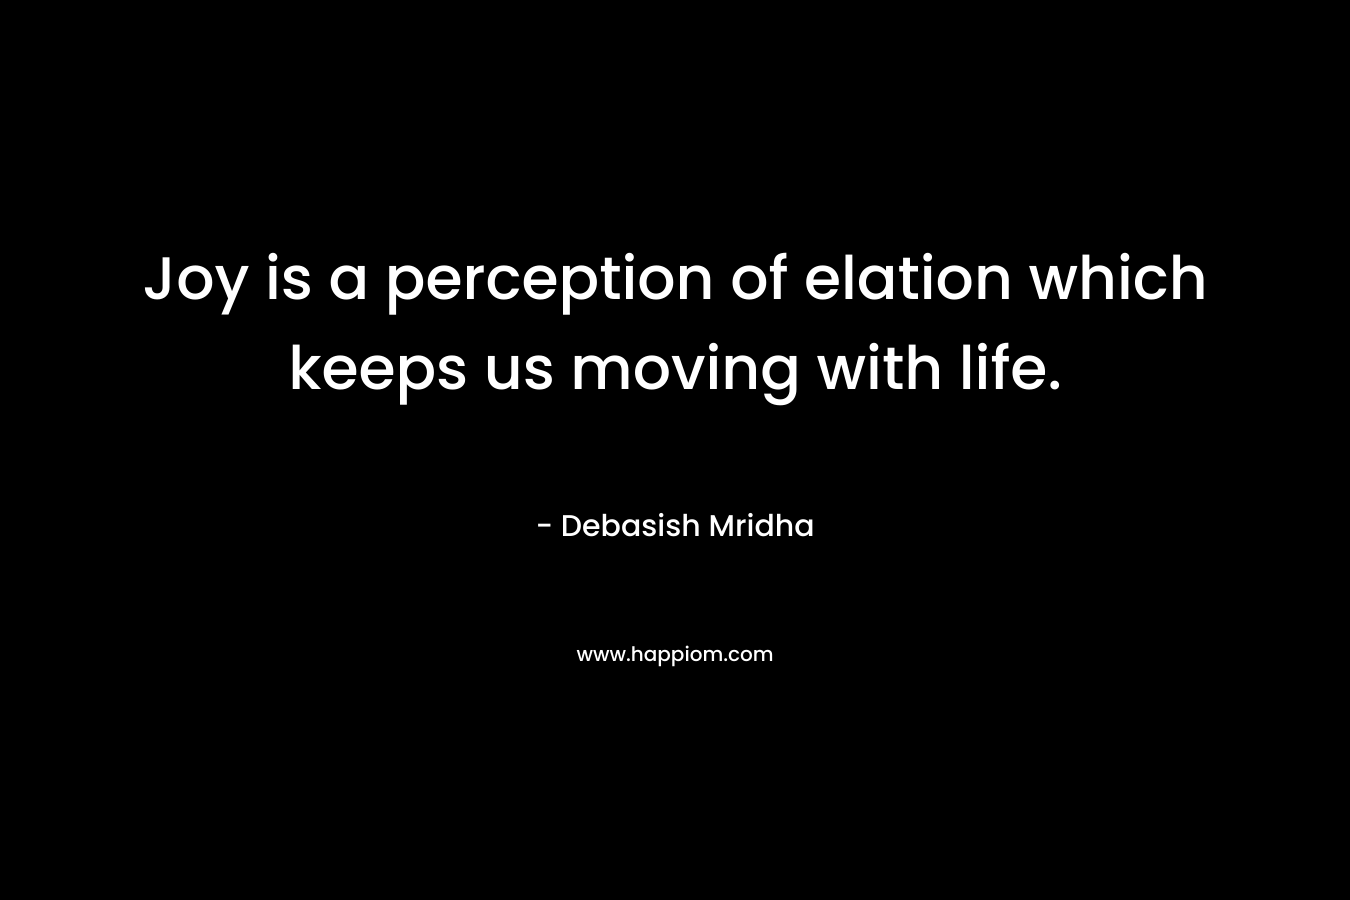 Joy is a perception of elation which keeps us moving with life. – Debasish Mridha